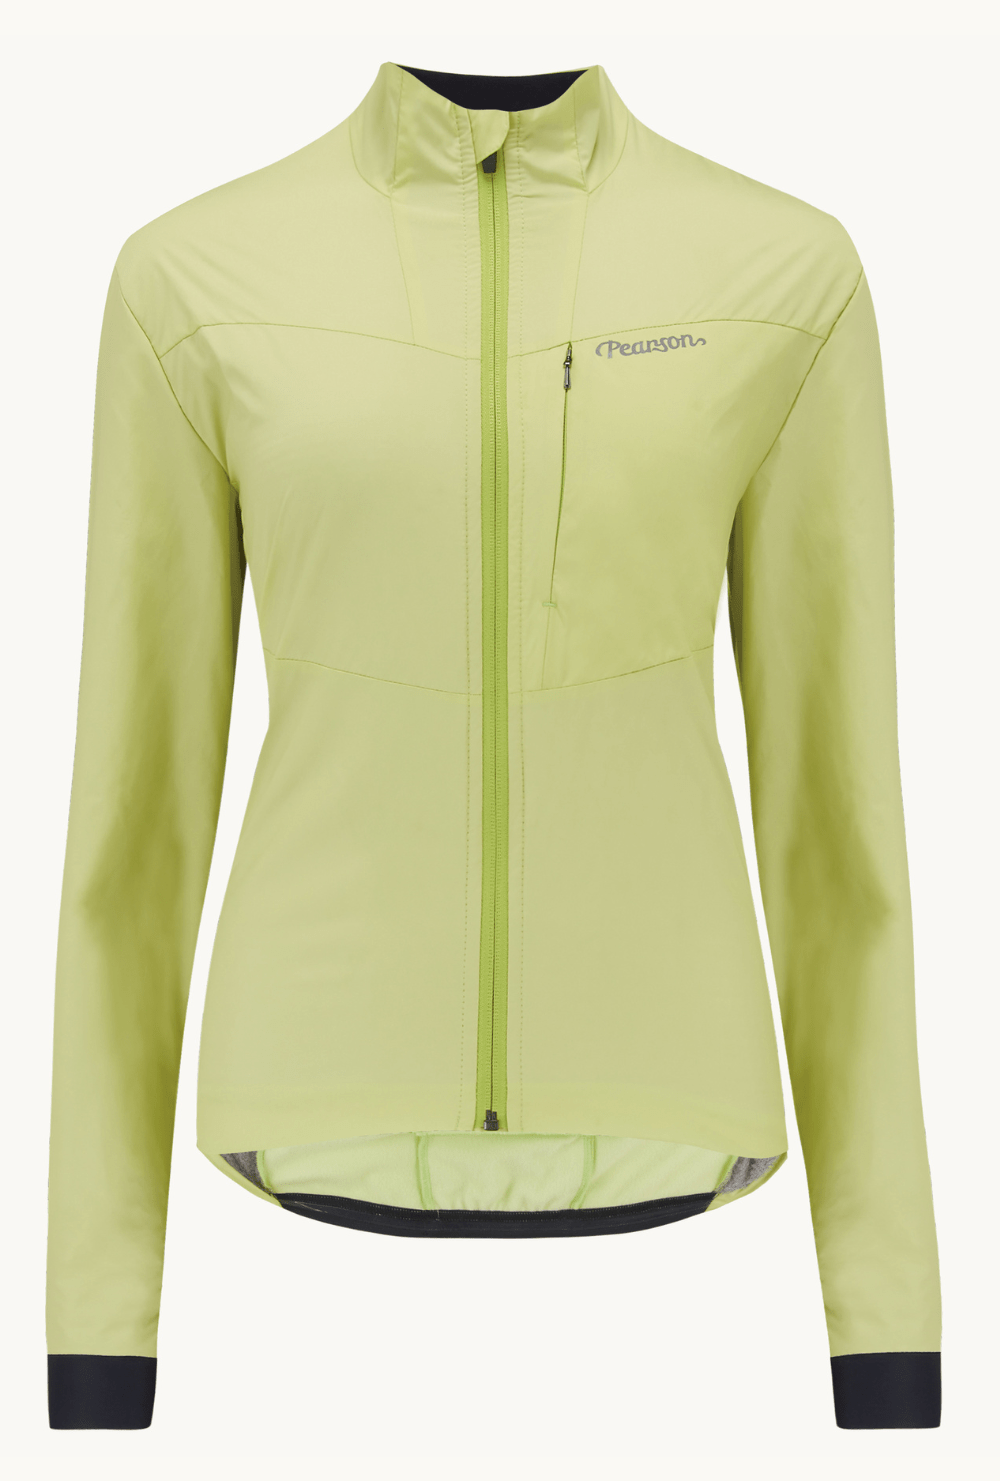 Pearson 1860  Test Your Mettle - Womens Road Insulated Jacket Shadow Lime  Shadow Lime / Medium